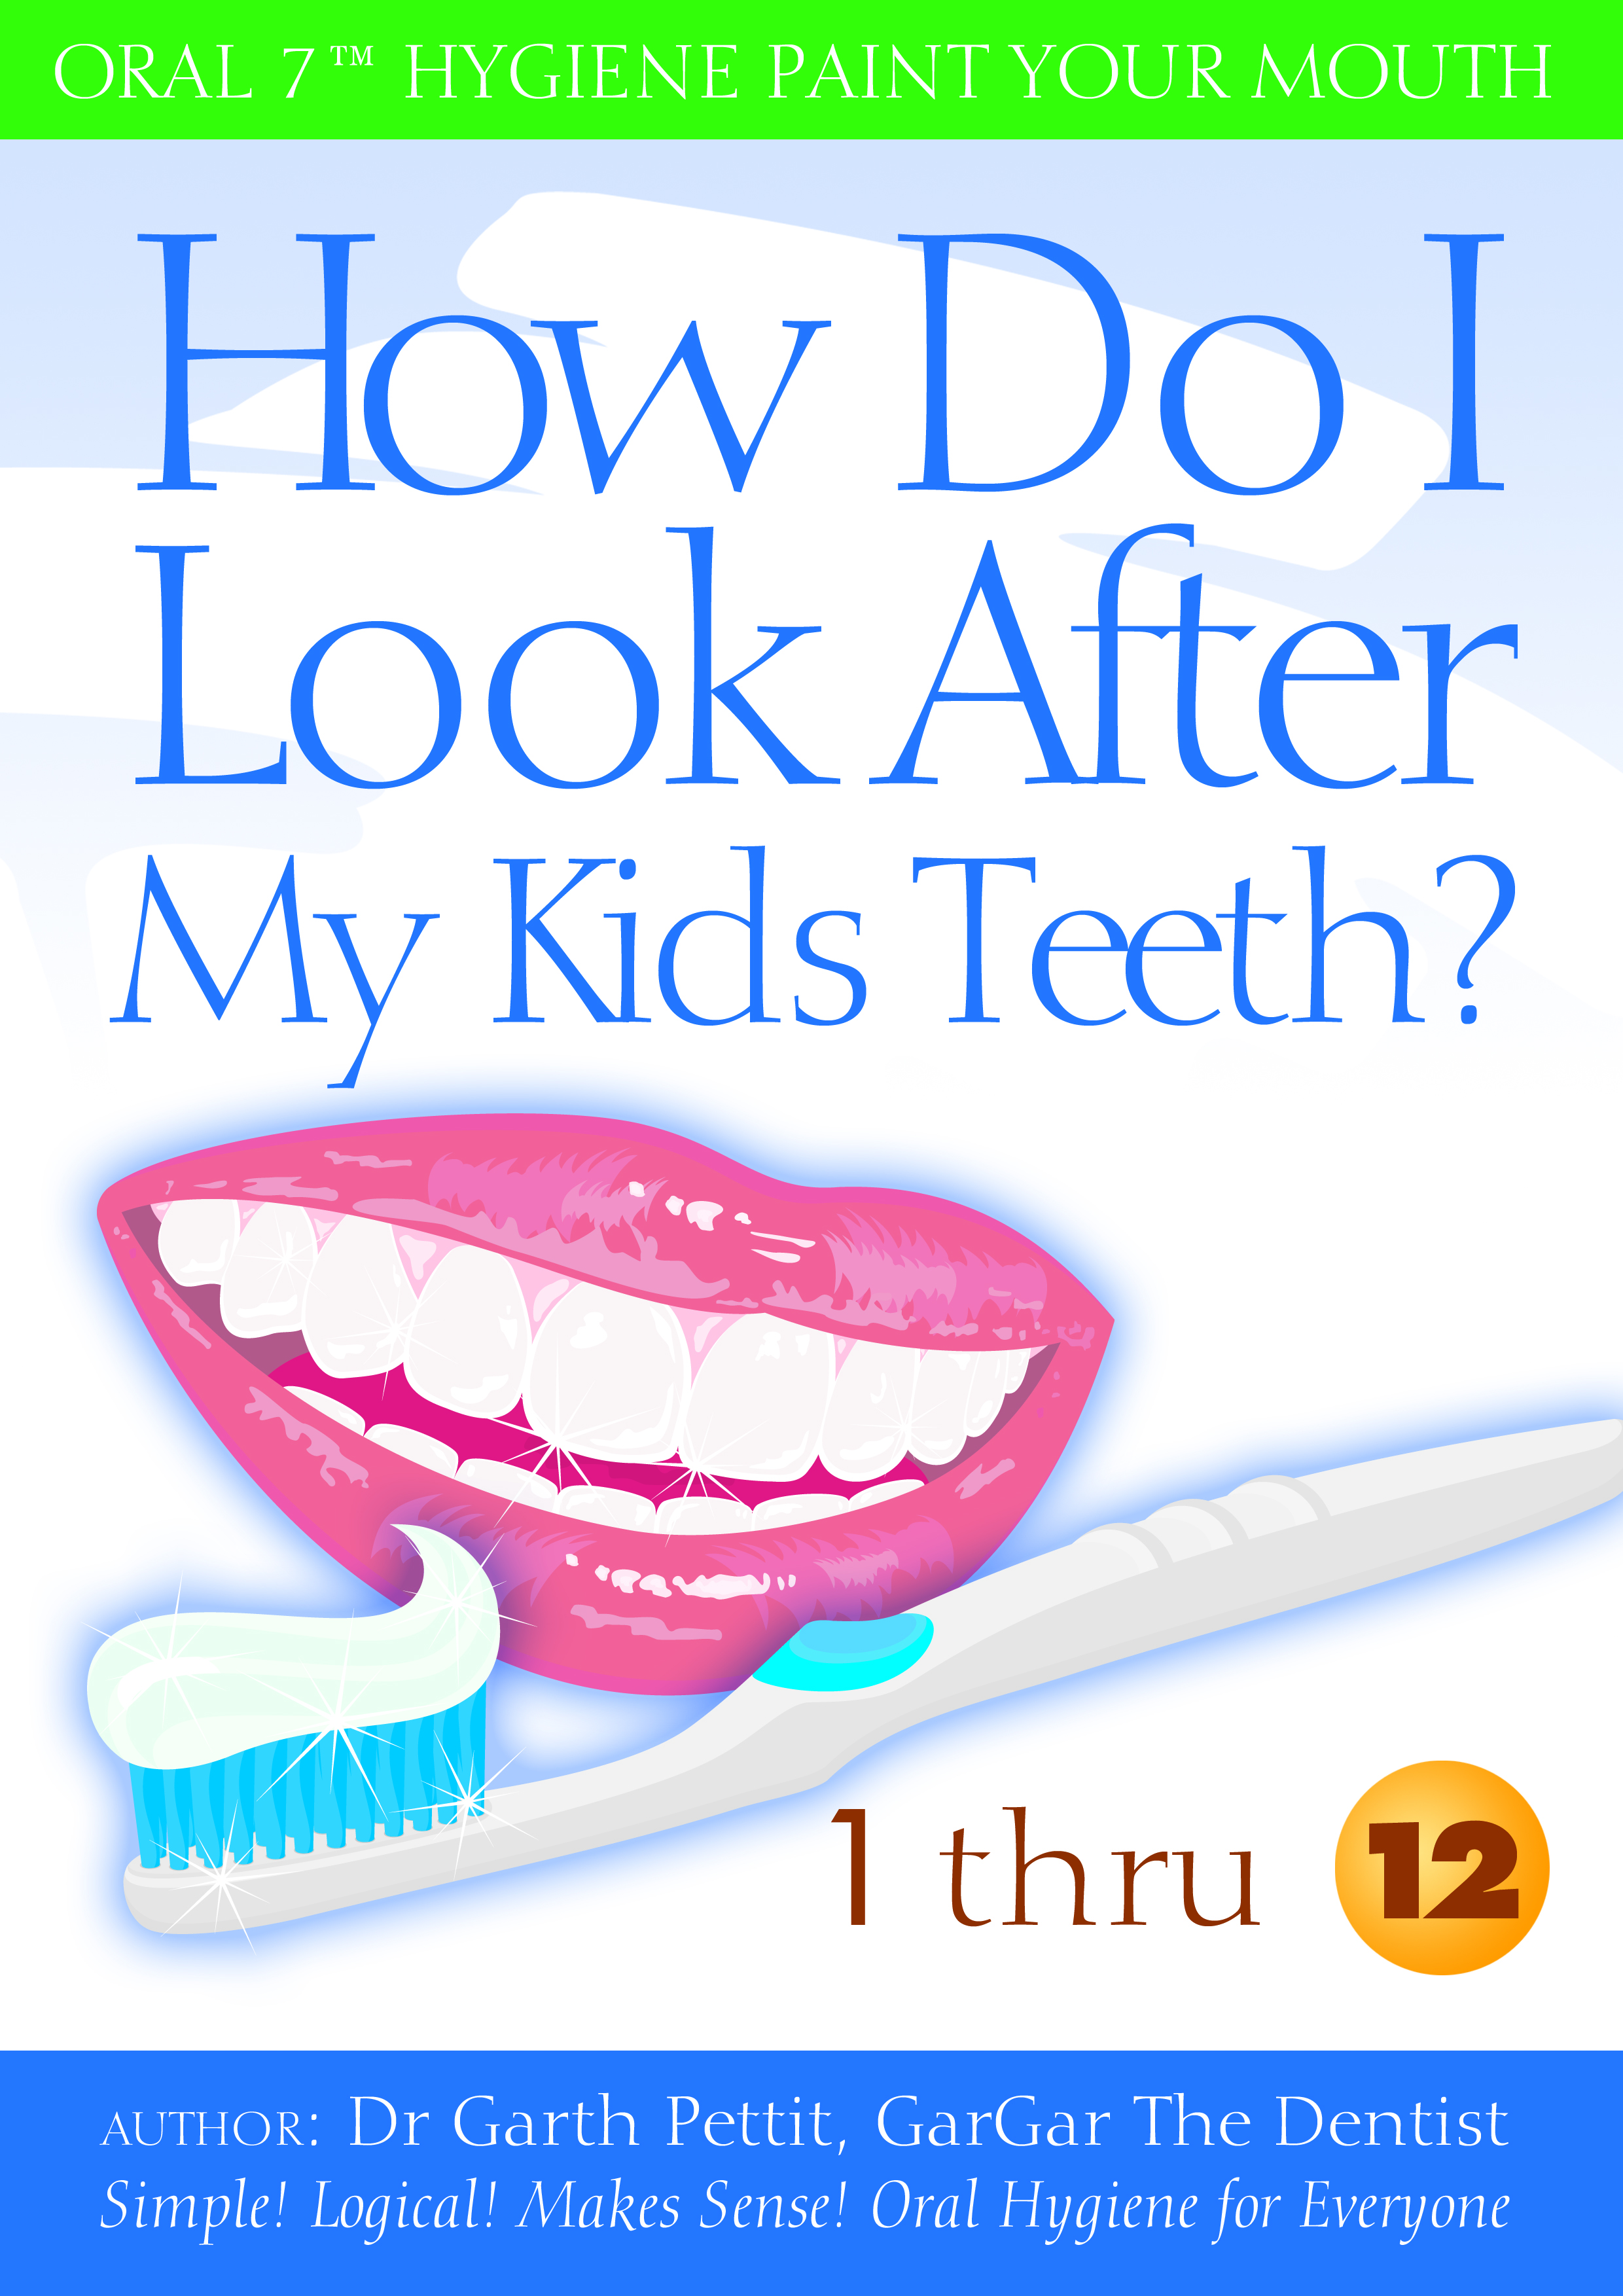 How Do I Look After My Kids Teeth? 1 thru 12 - Five Star Midwest ...